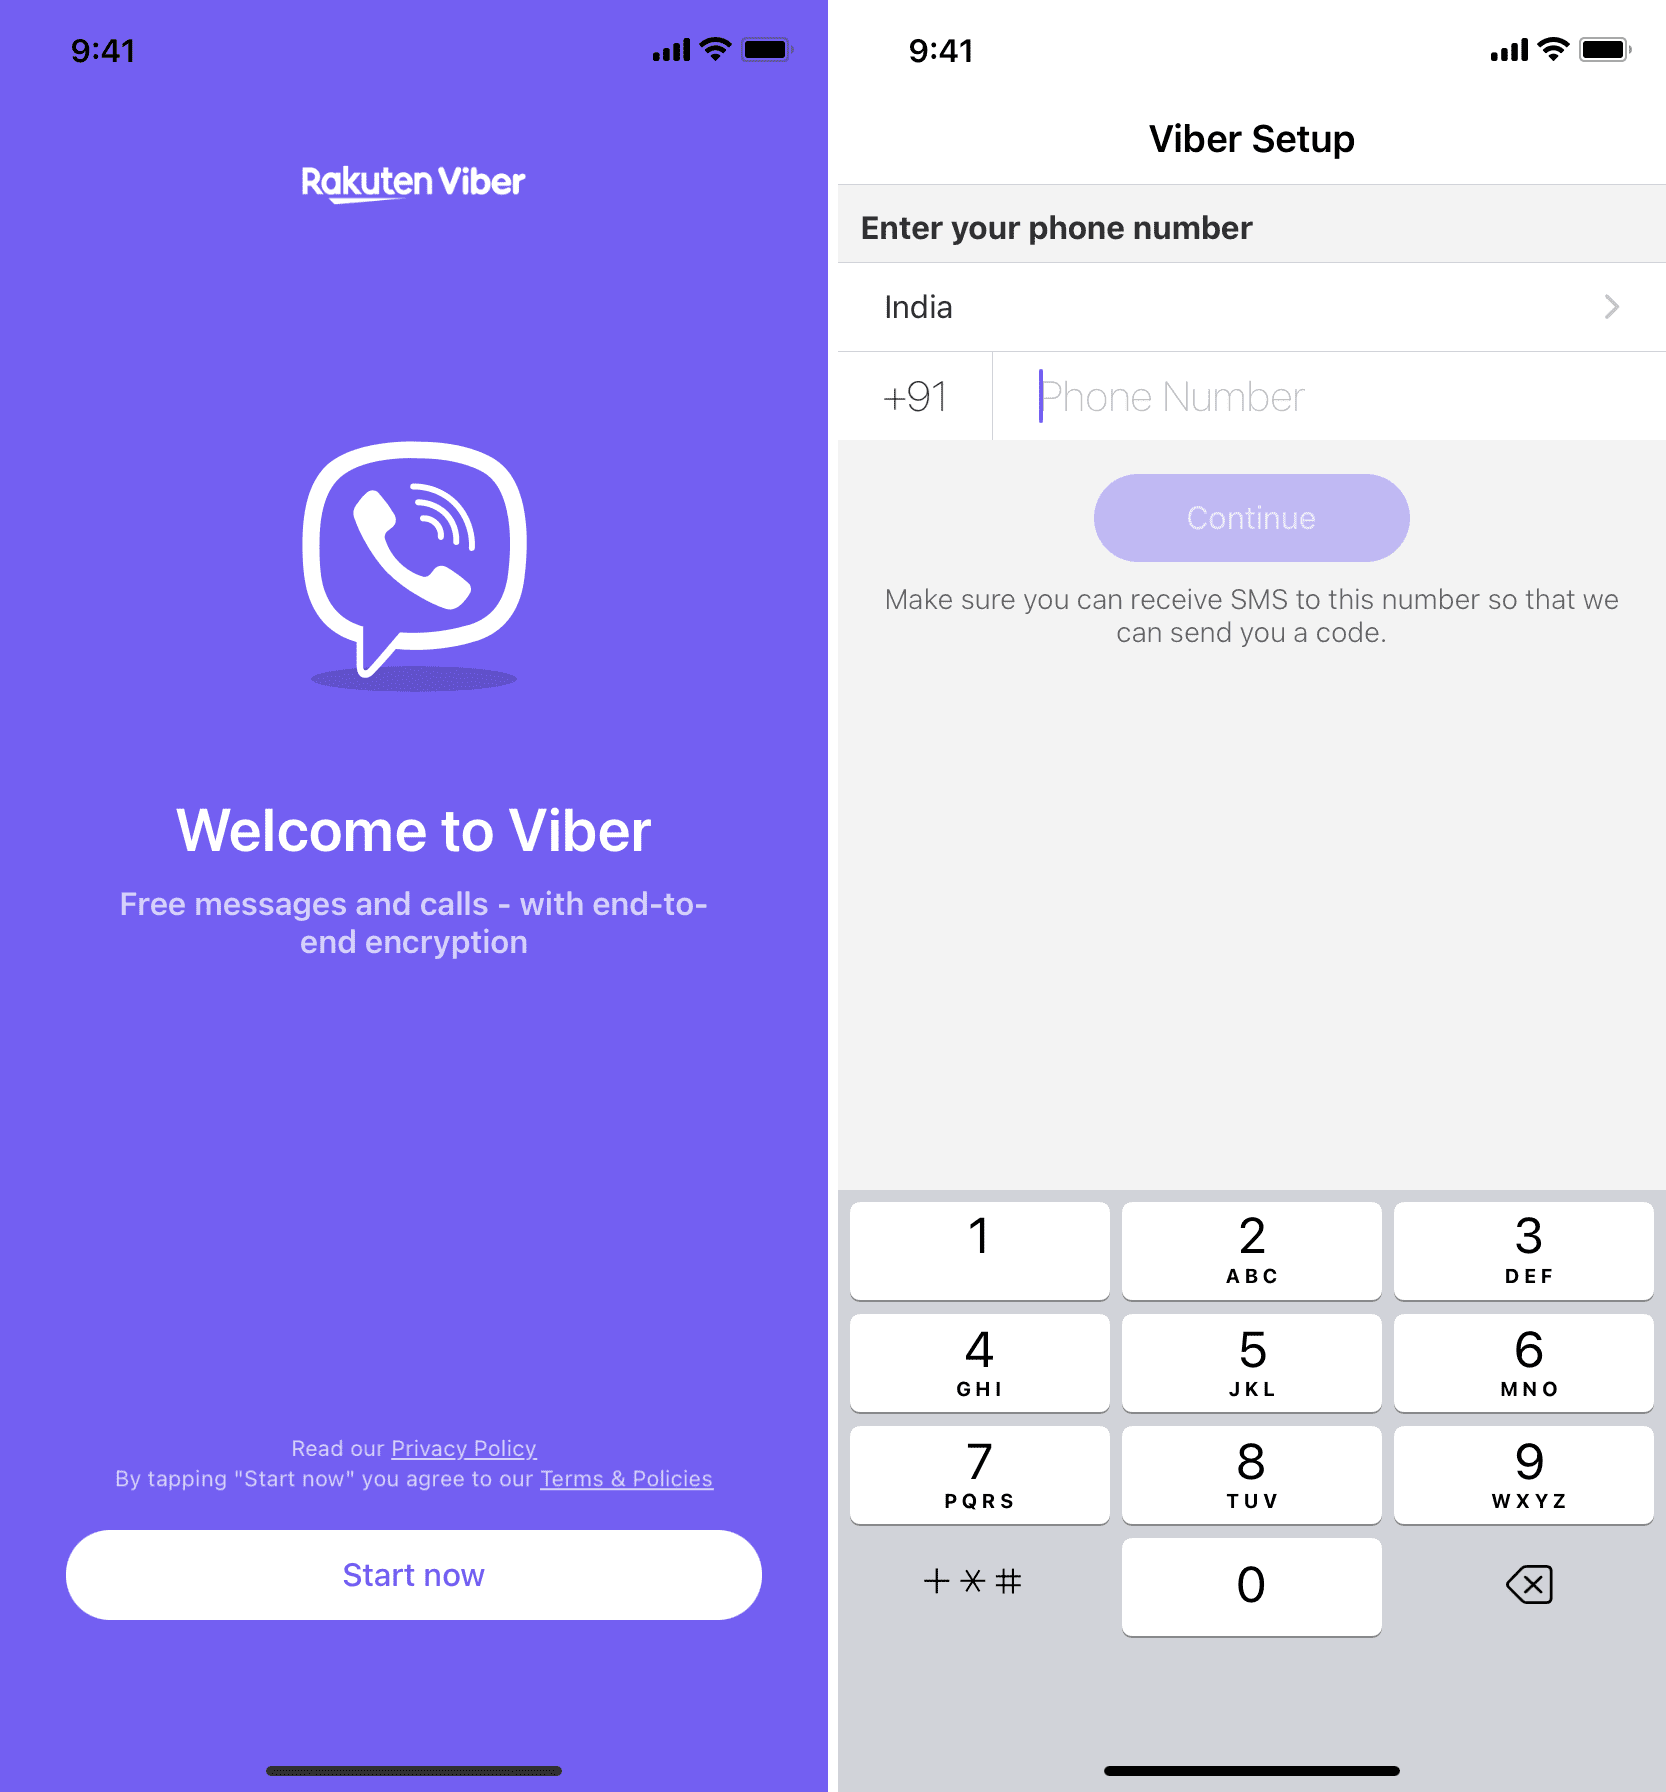 Re-register your Viber account